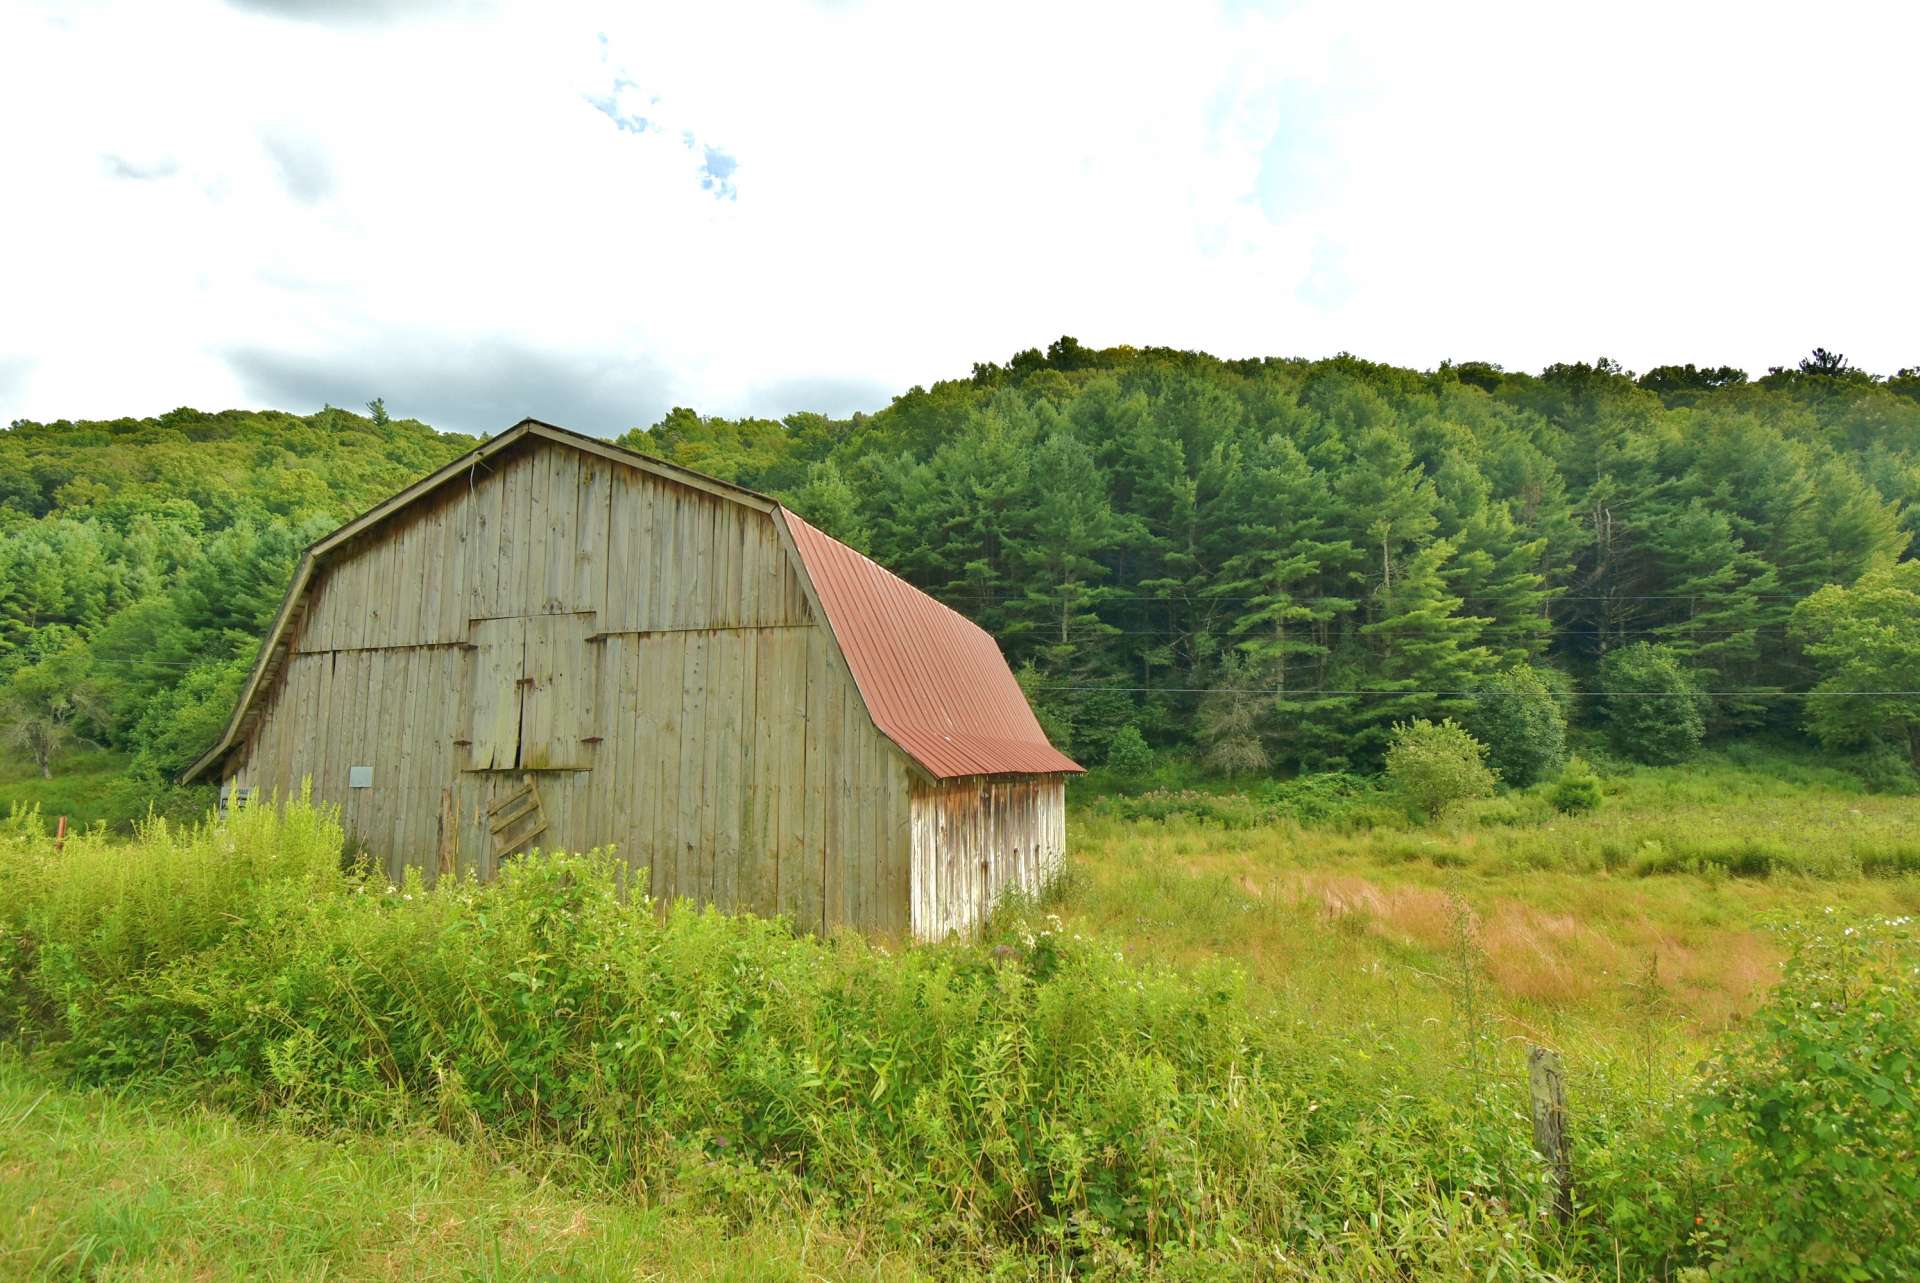 Also included is a nice barn with easy access for livestock, equipment, or harvested crops.